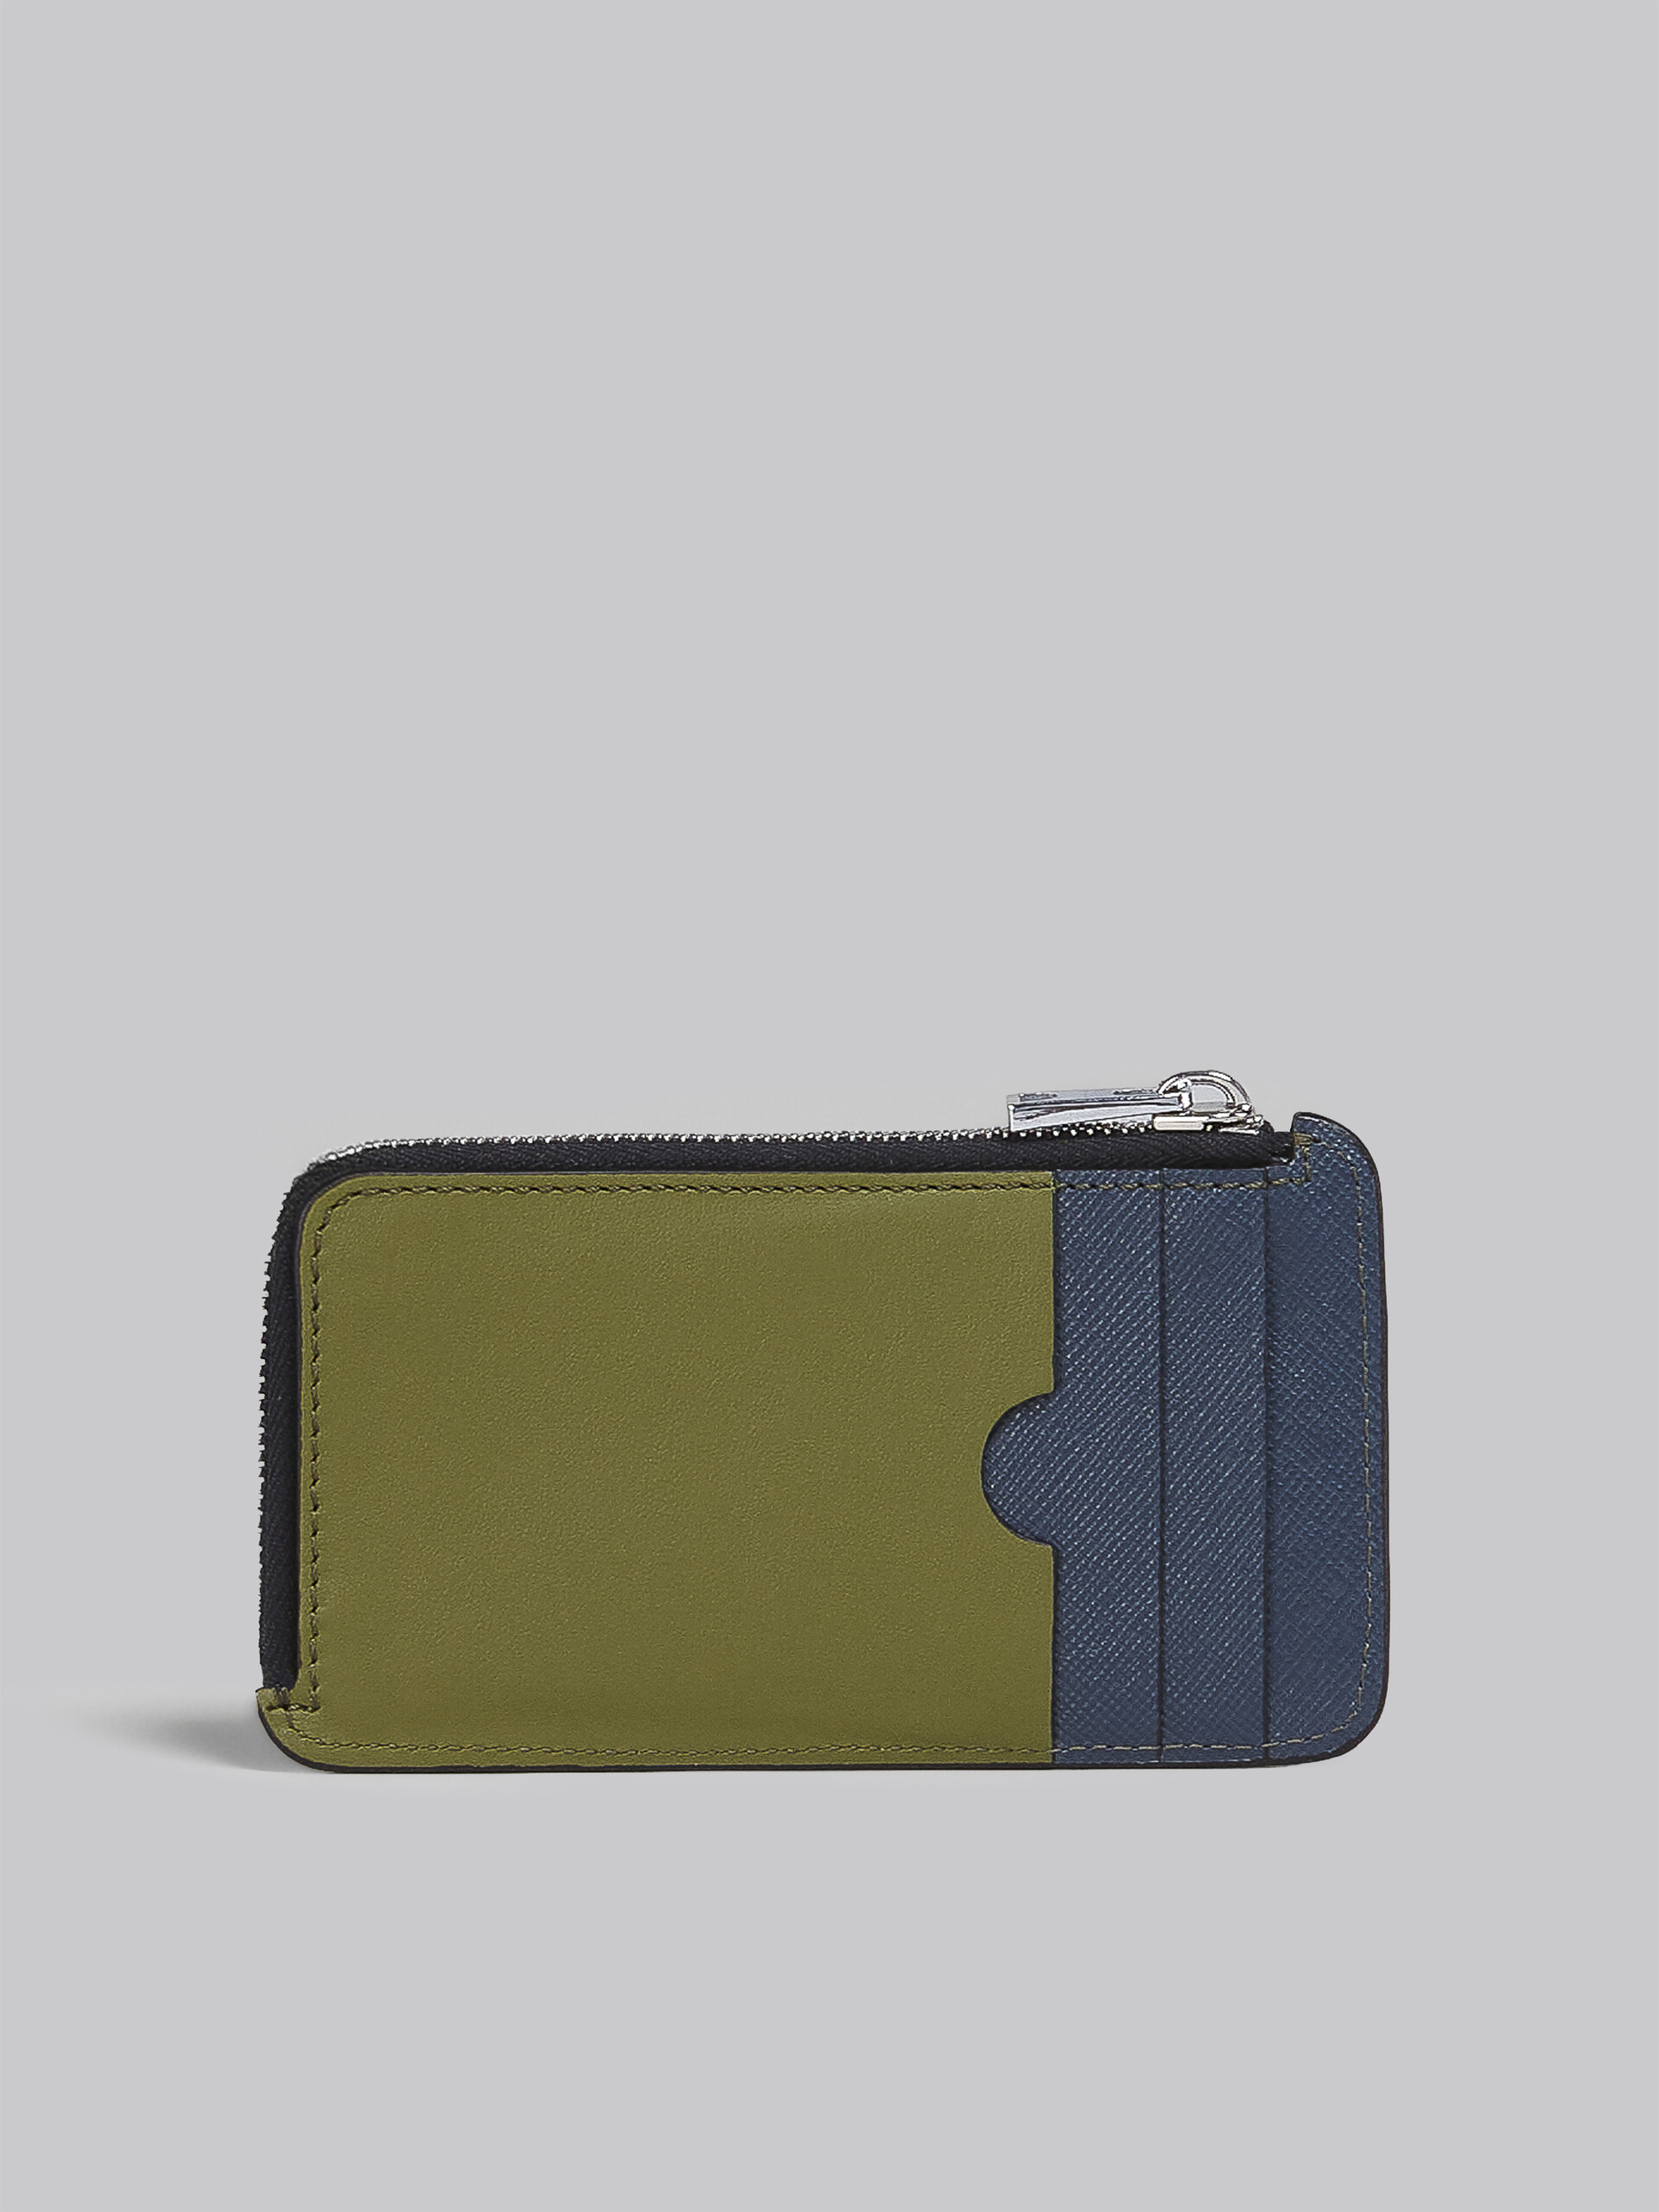 Black green and blue saffiano leather zip-around card case - Wallets - Image 3